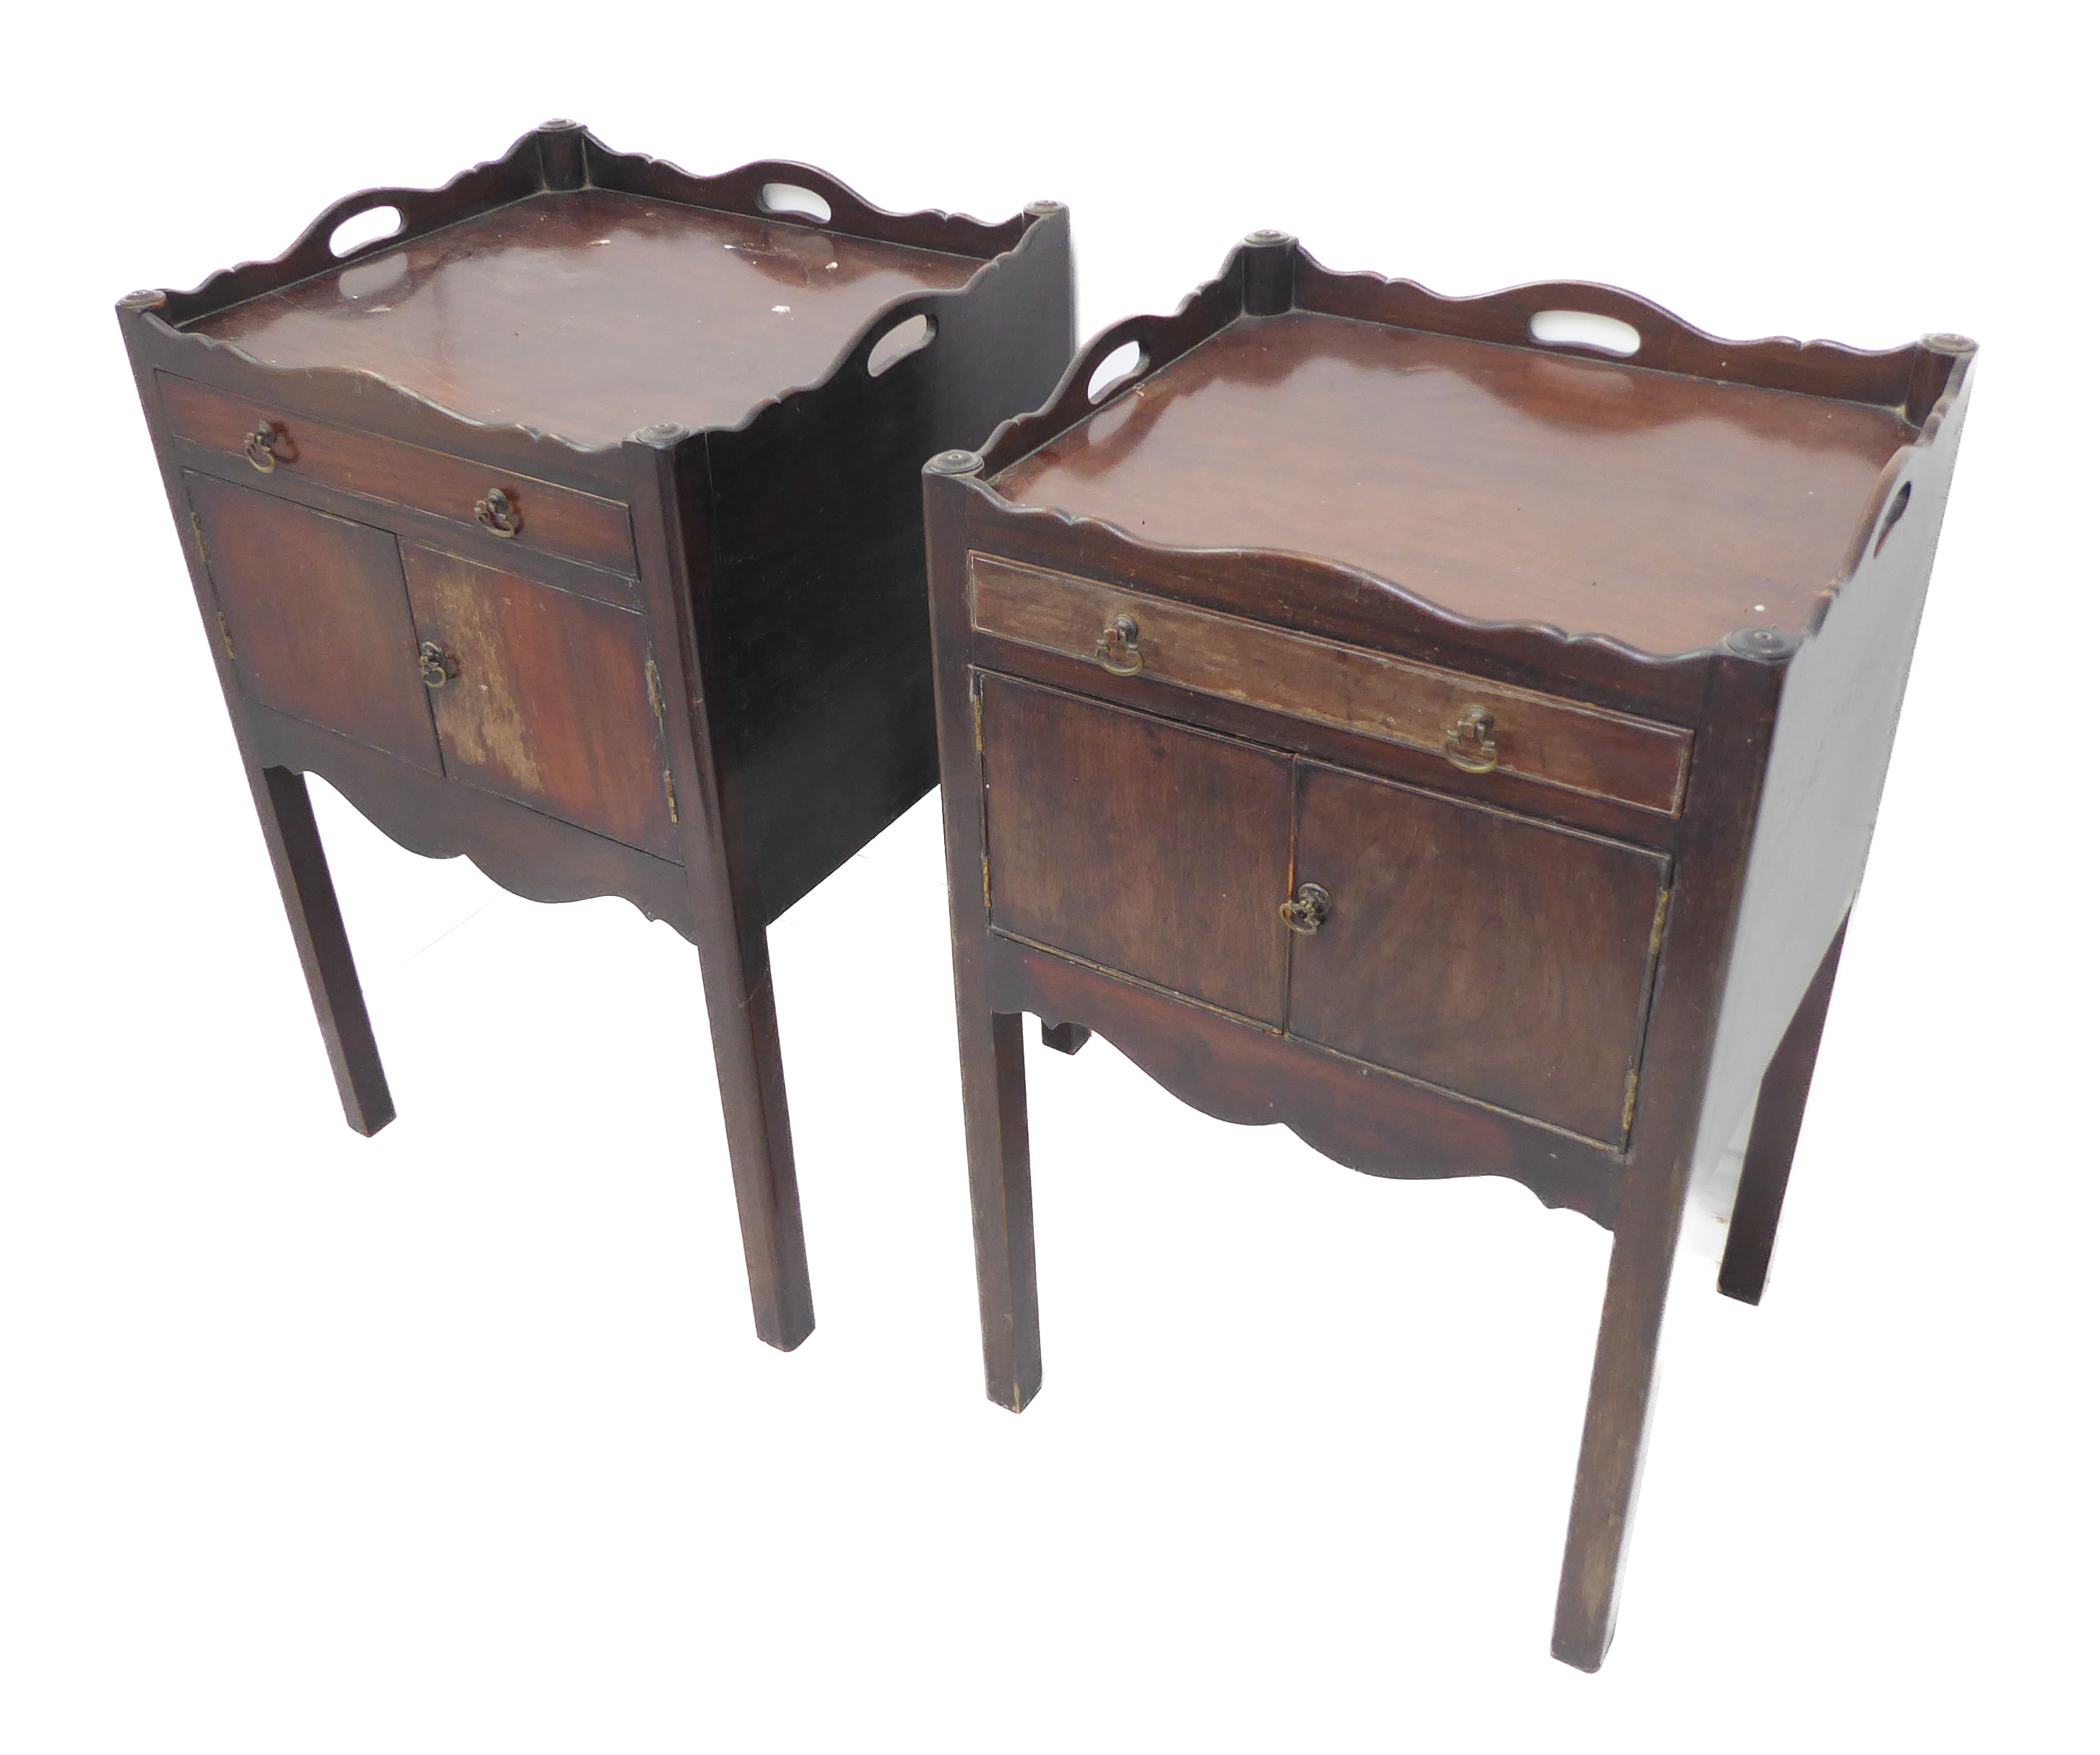 Two very similar George III style tray top mahogany commodes: each with single drawer, two